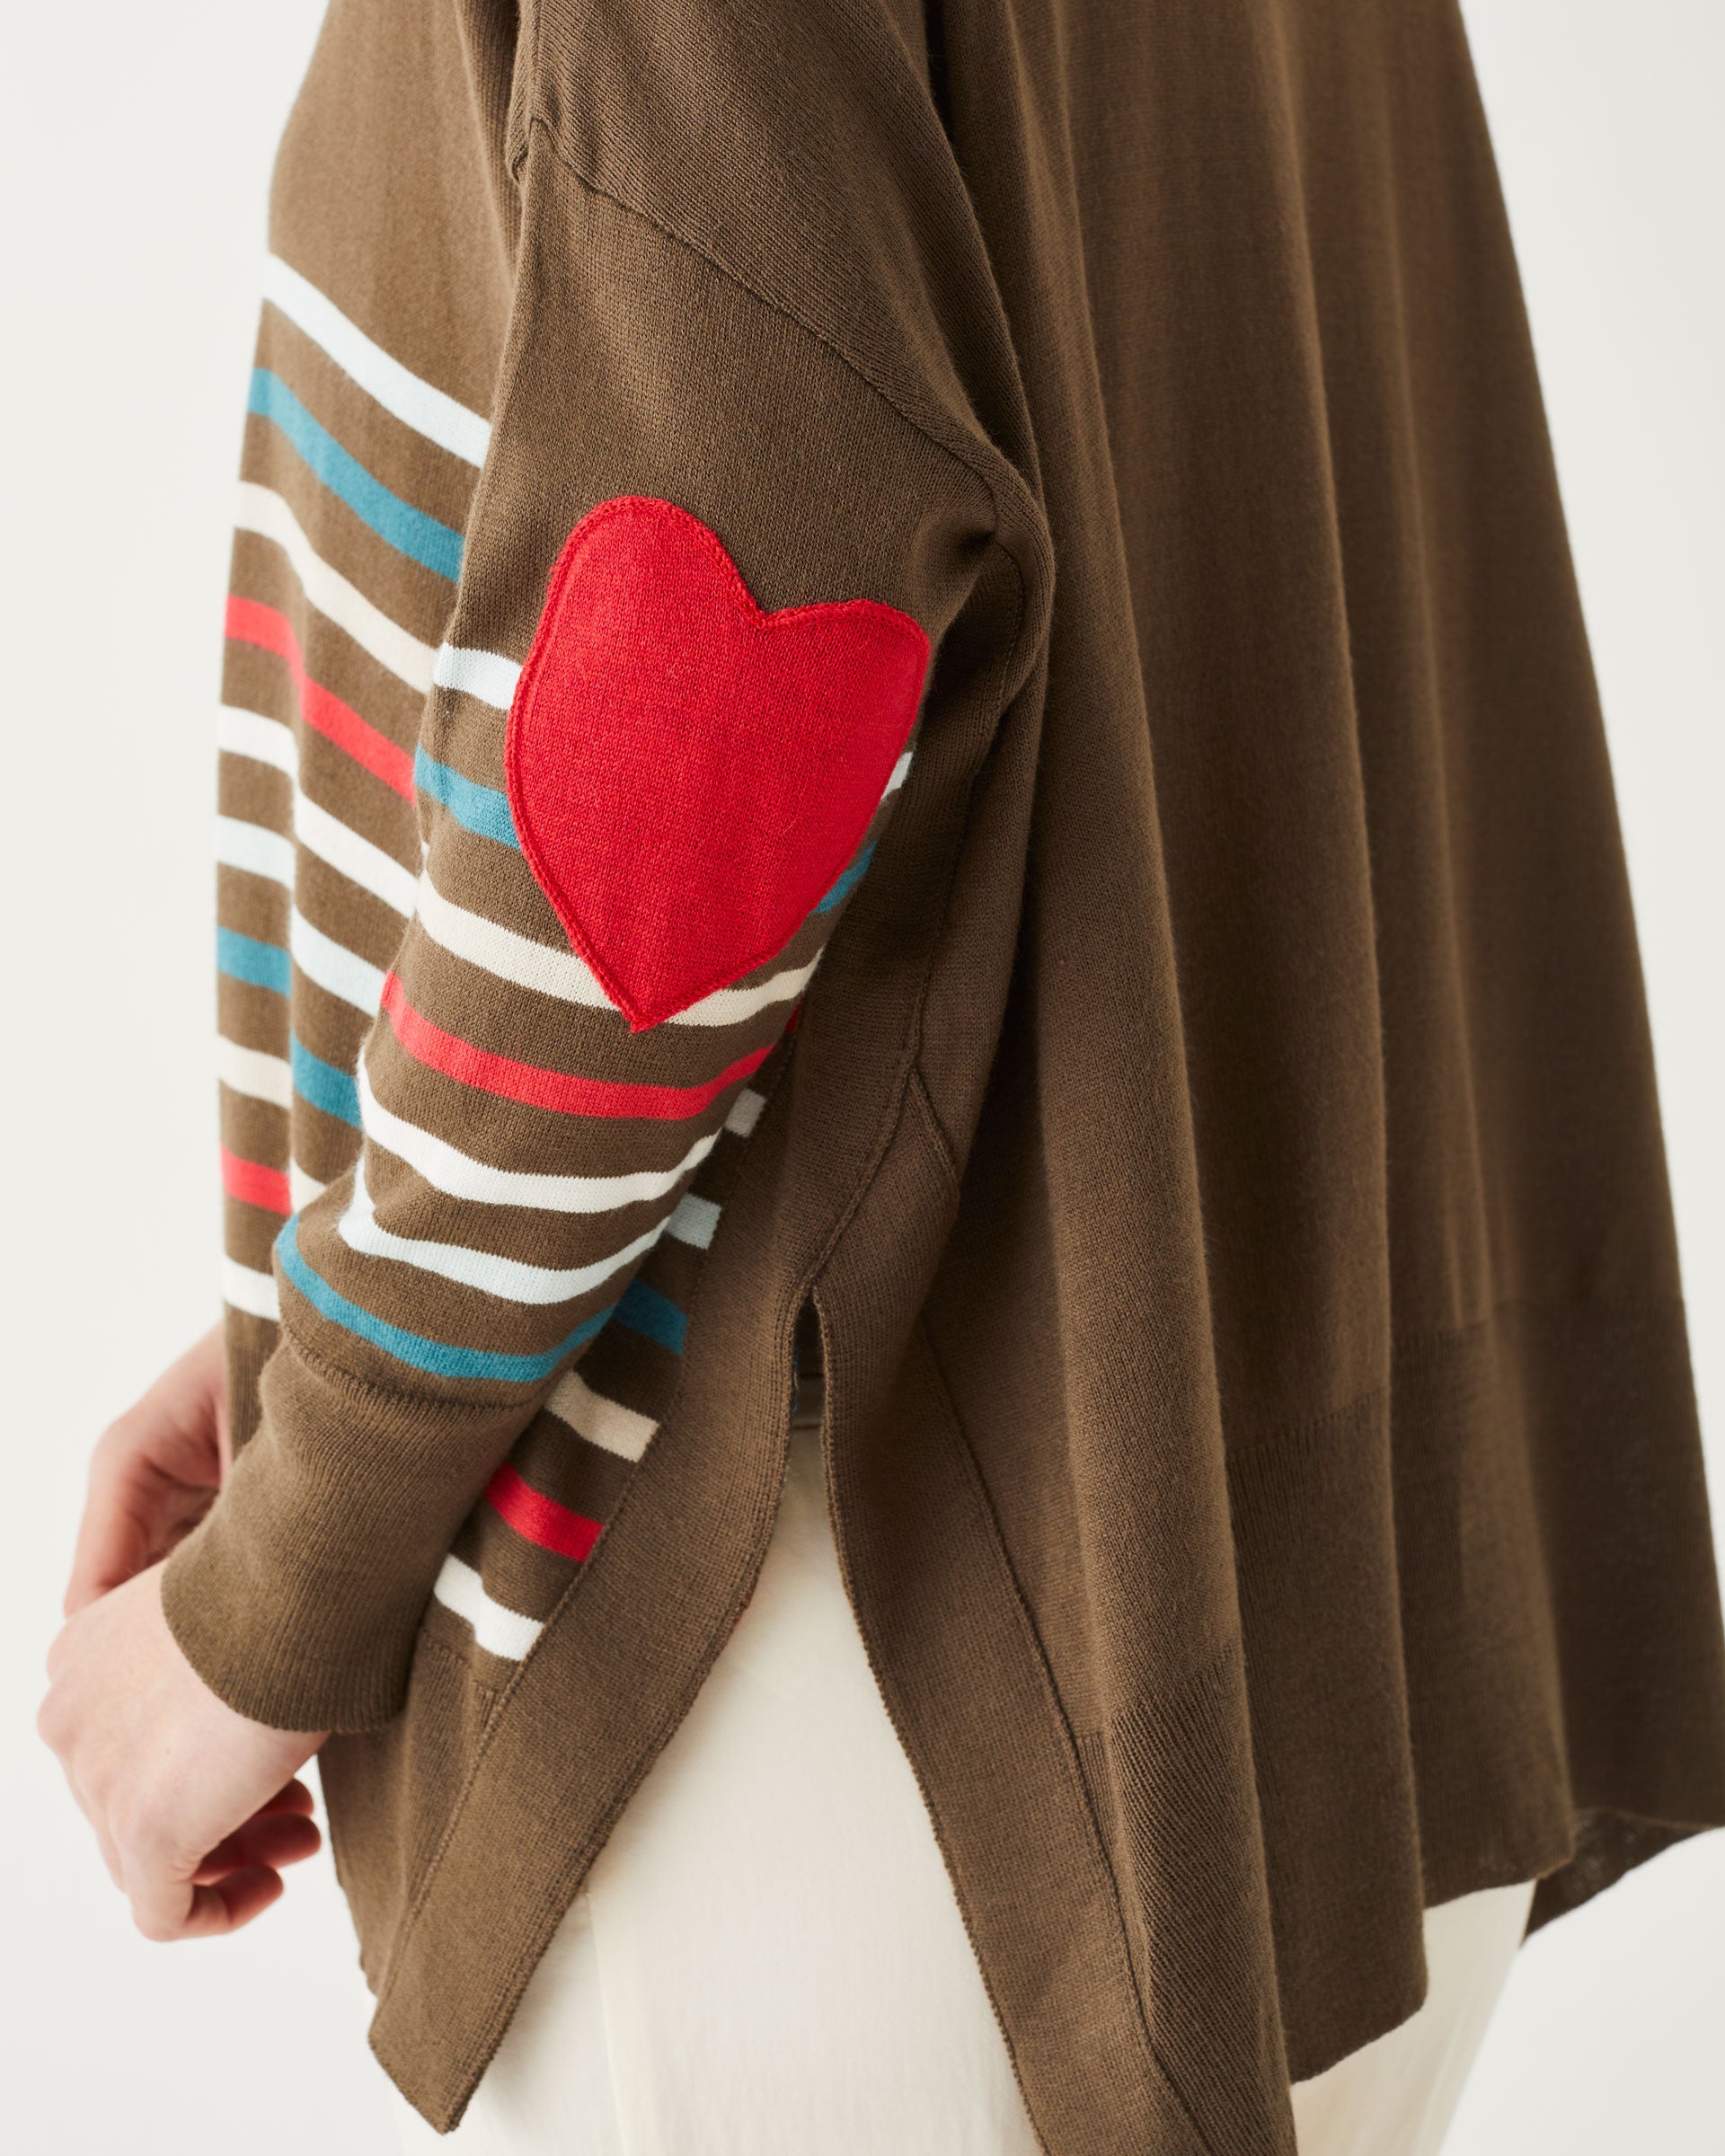 Brown amour Sweater in multicolor stripes with red heart elbow patch